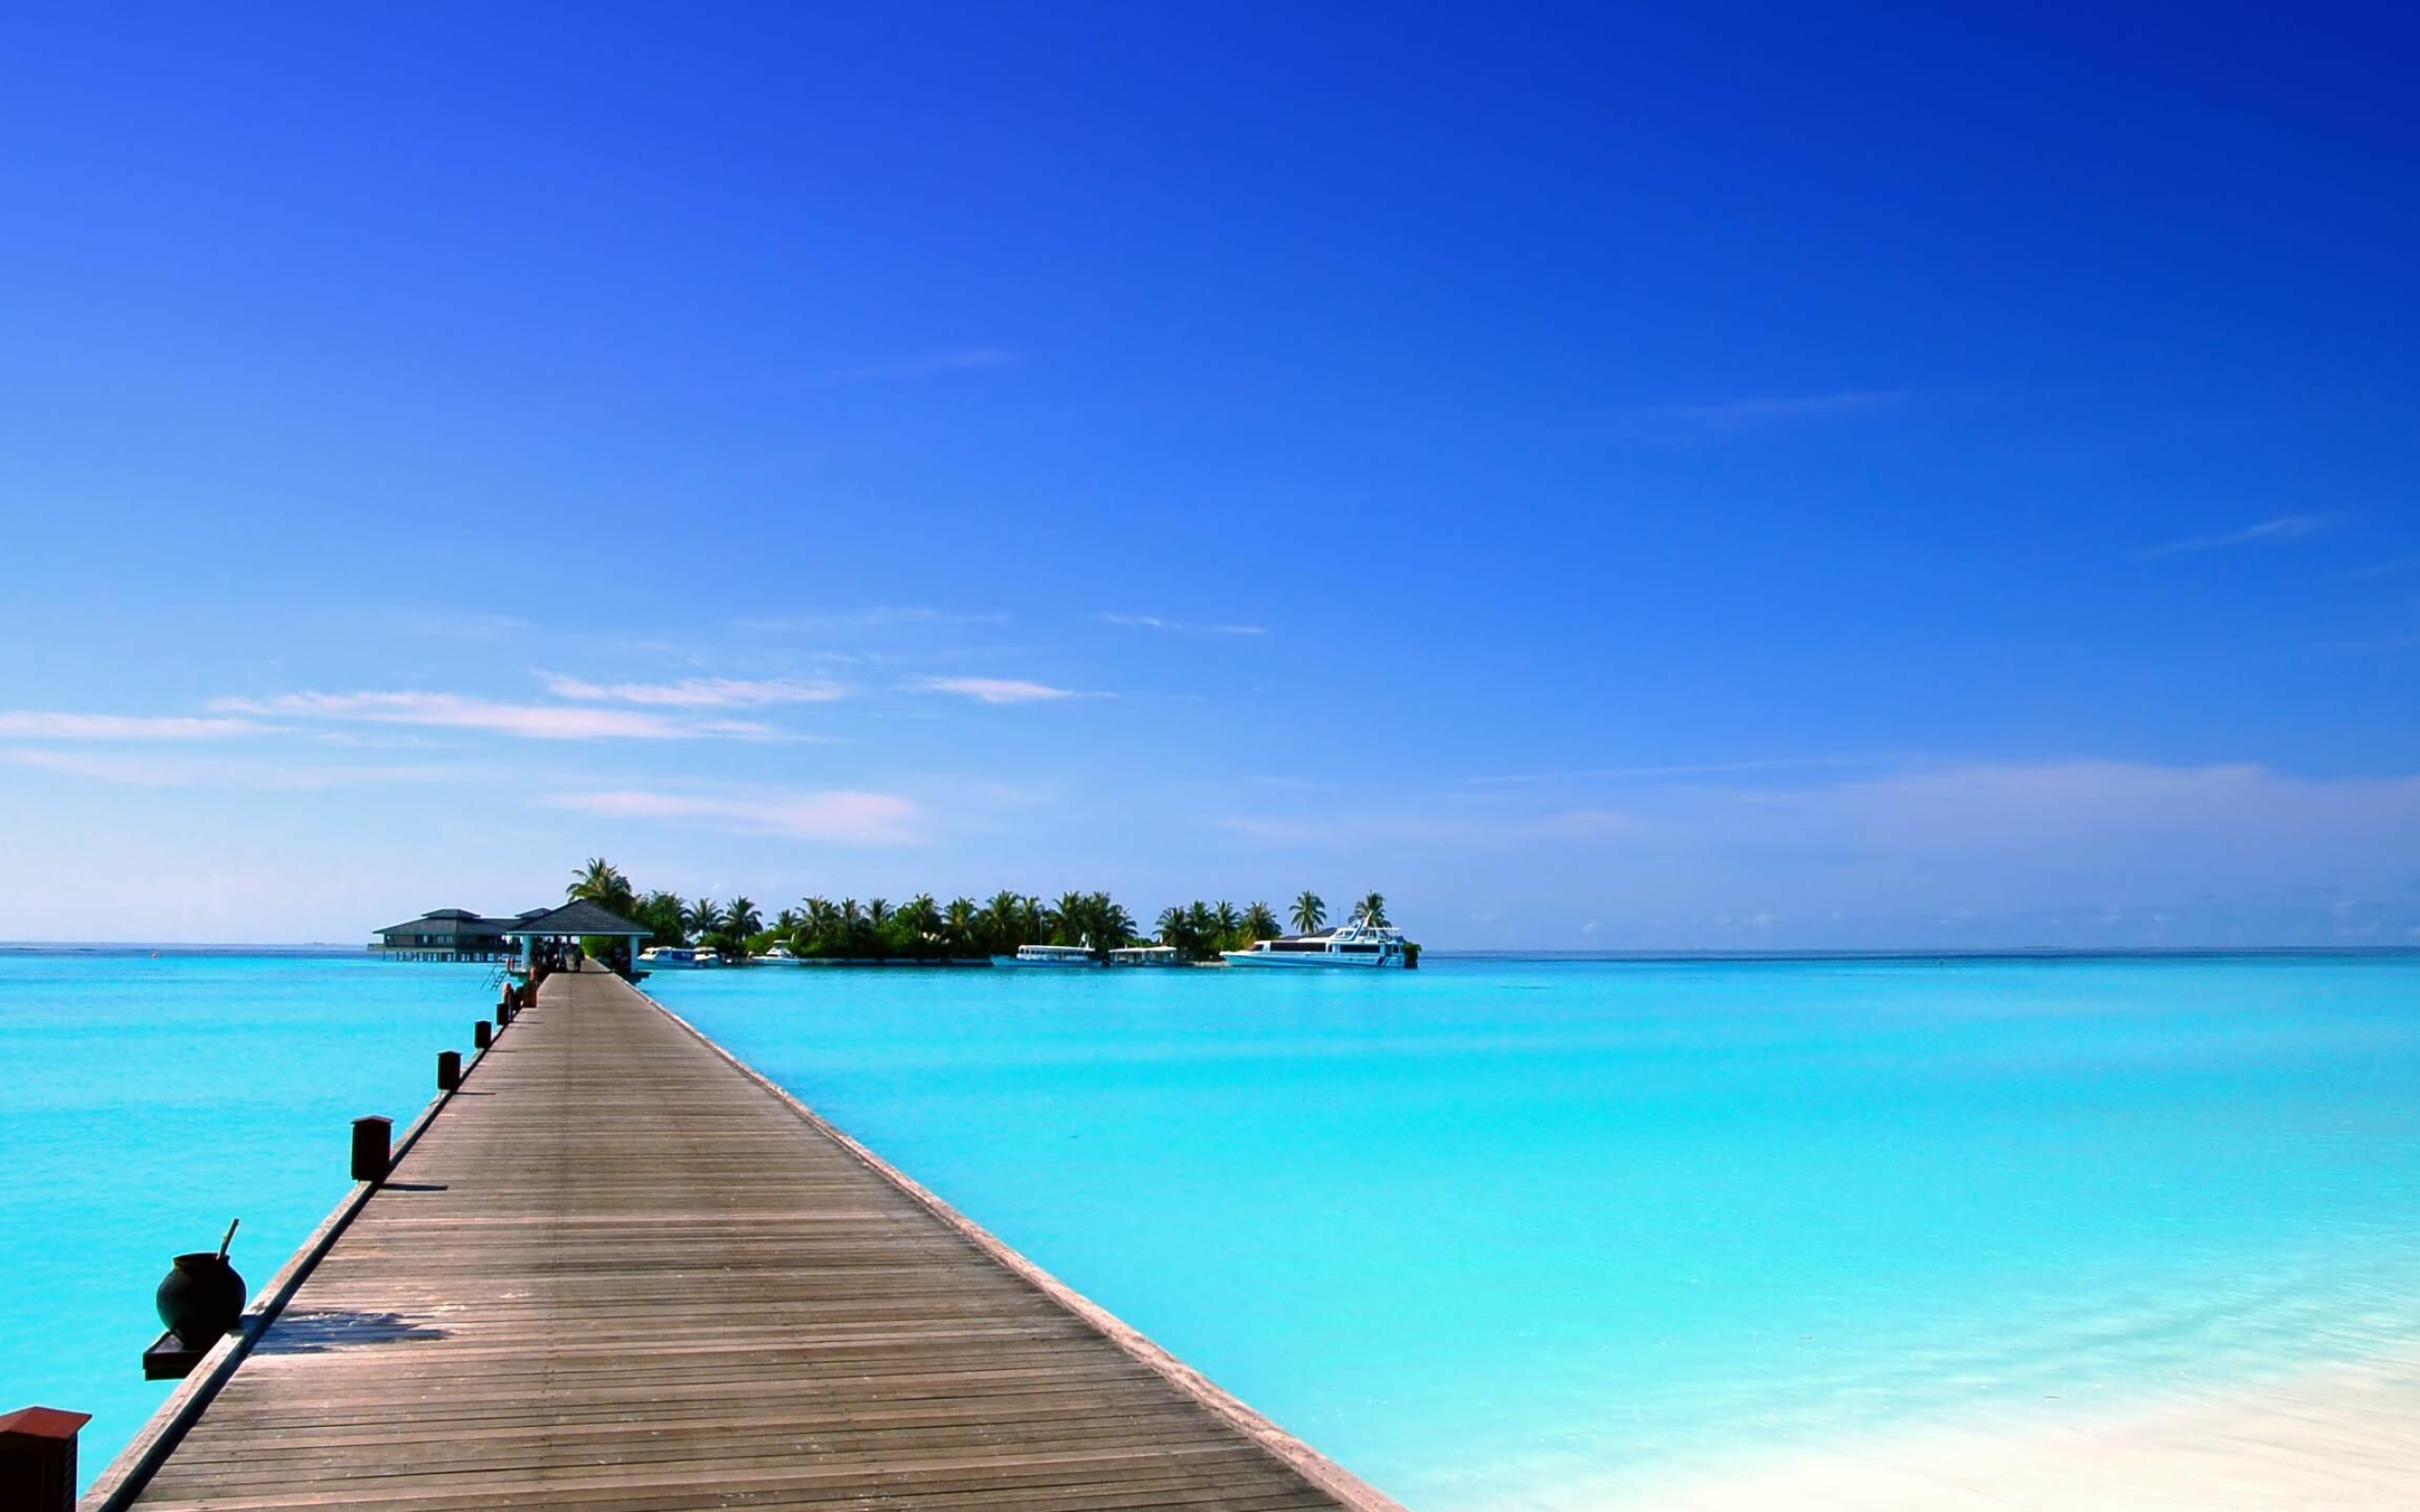 Maldives: One of the smallest Muslim-majority countries, Beach, Tropical island paradise. 2560x1600 HD Background.